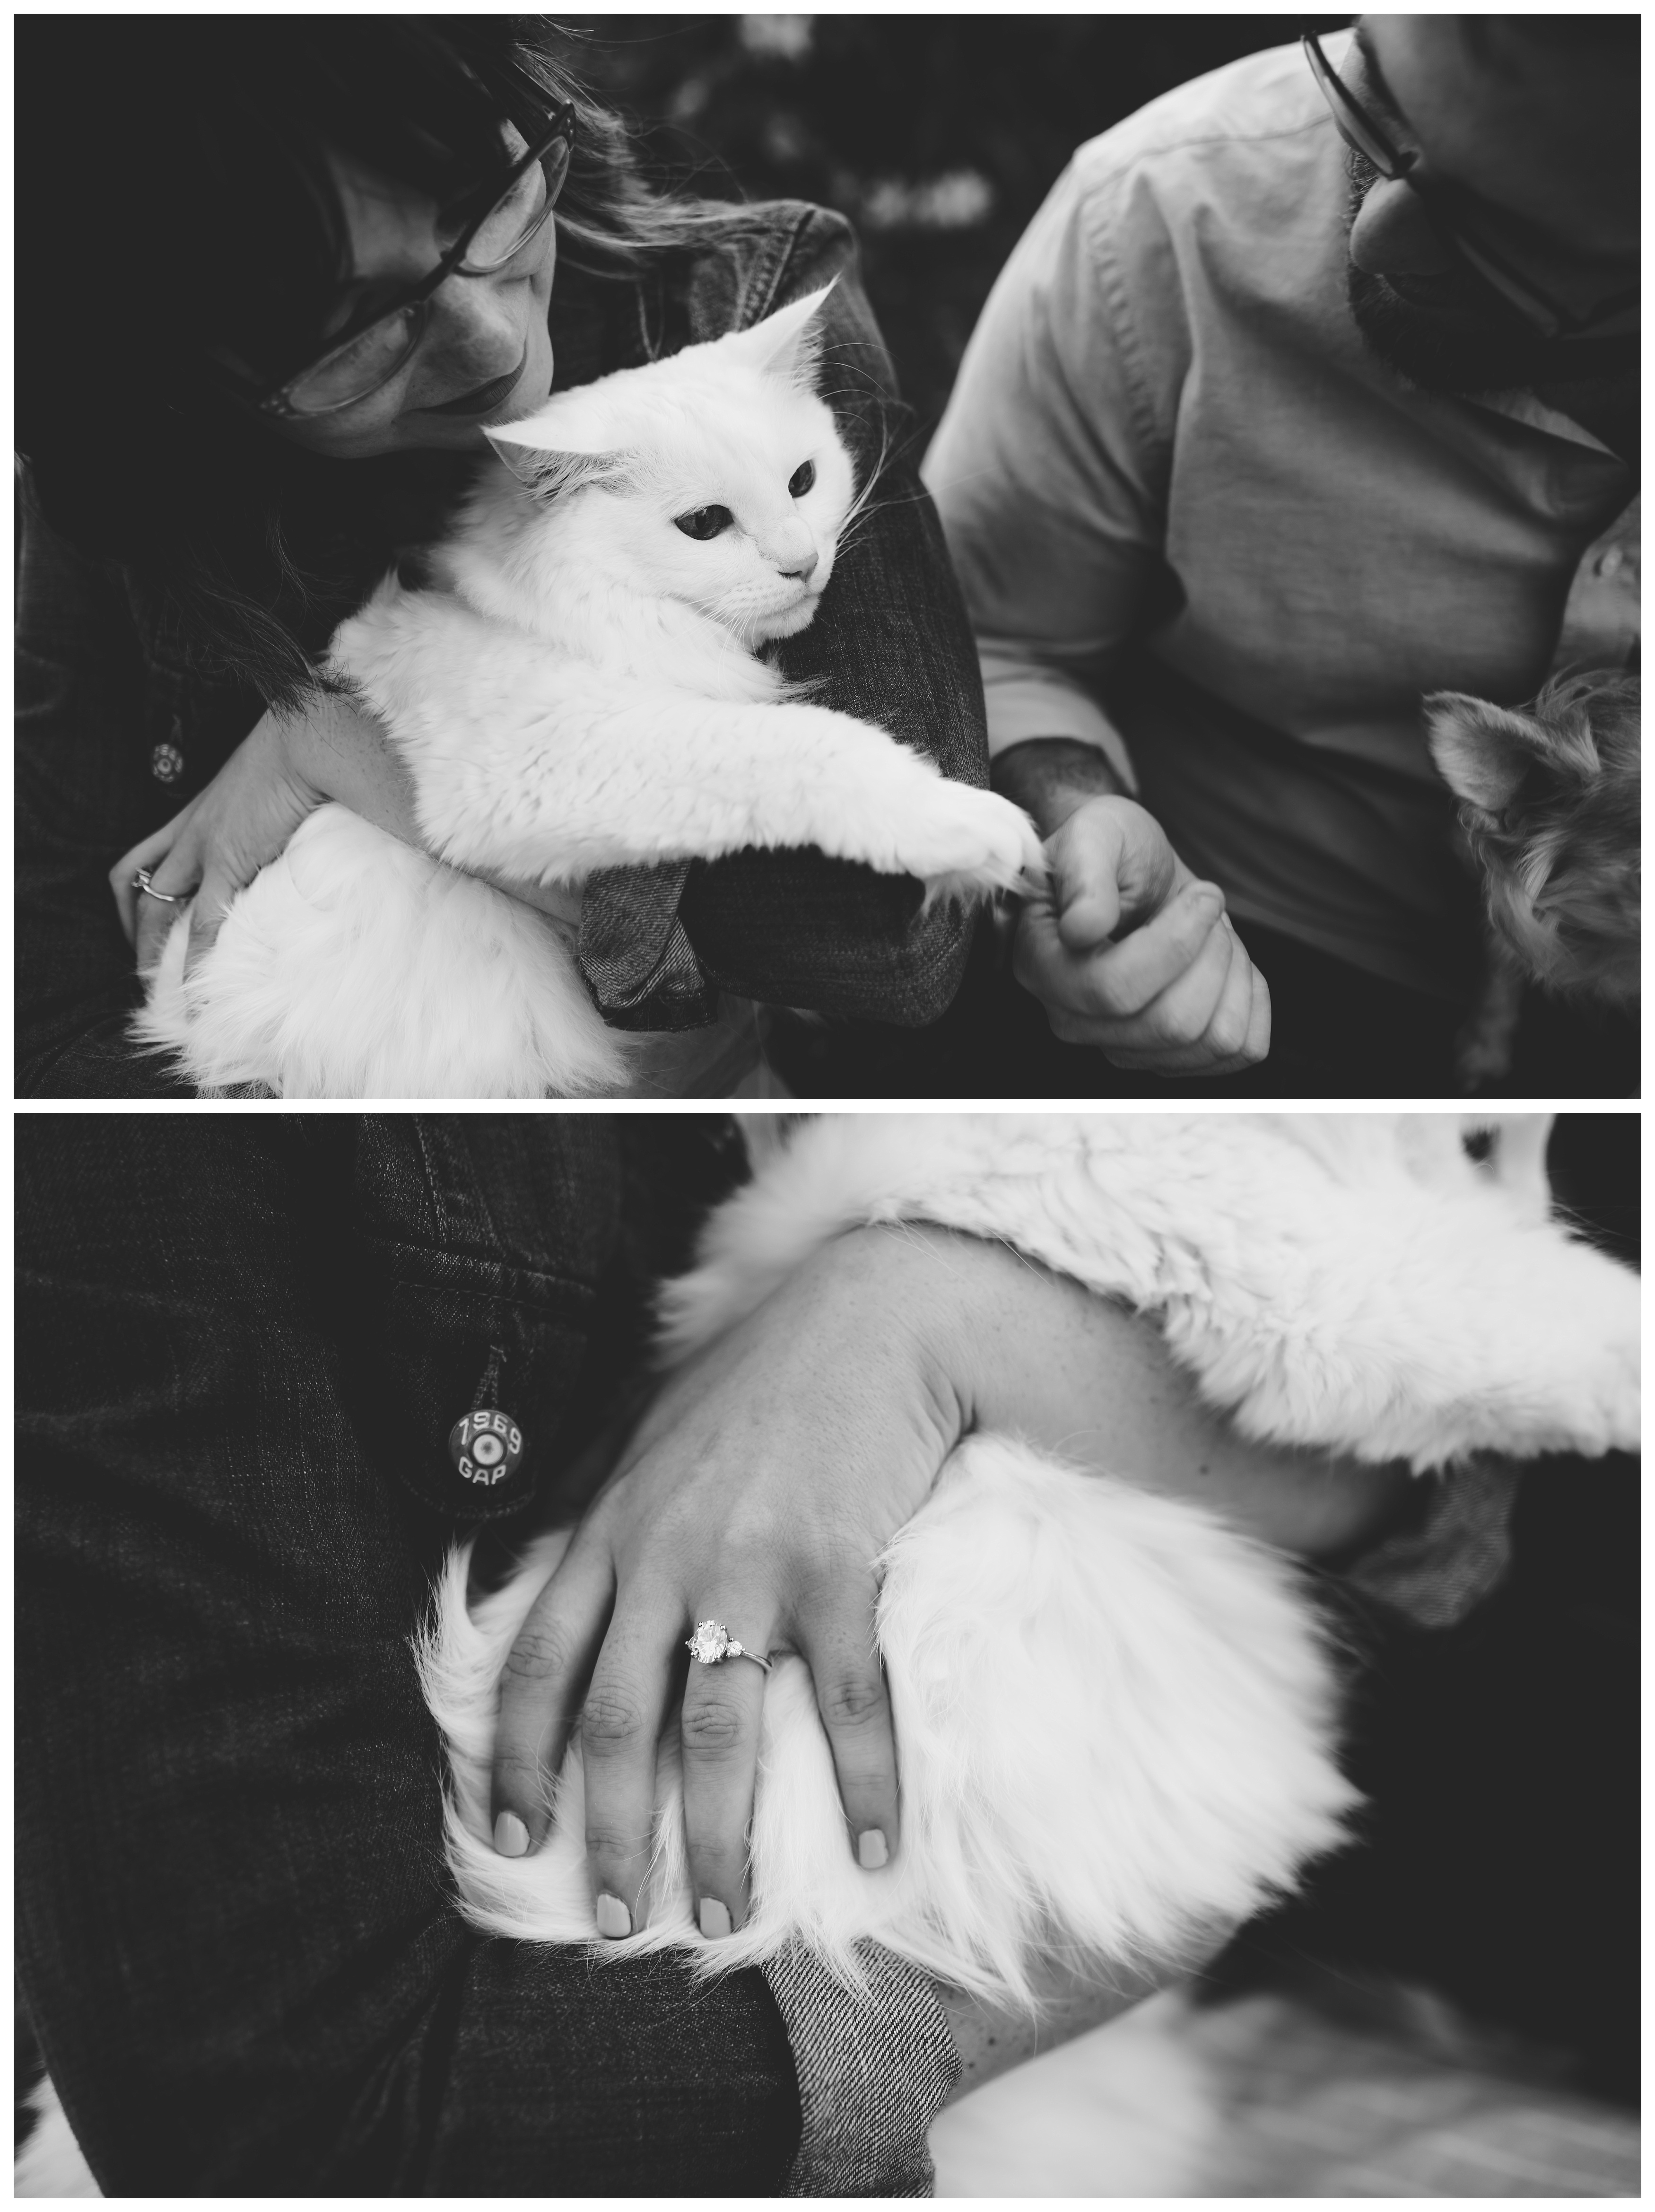 Detail photos of the engagement ring on a cat. Shelly Williams Photography